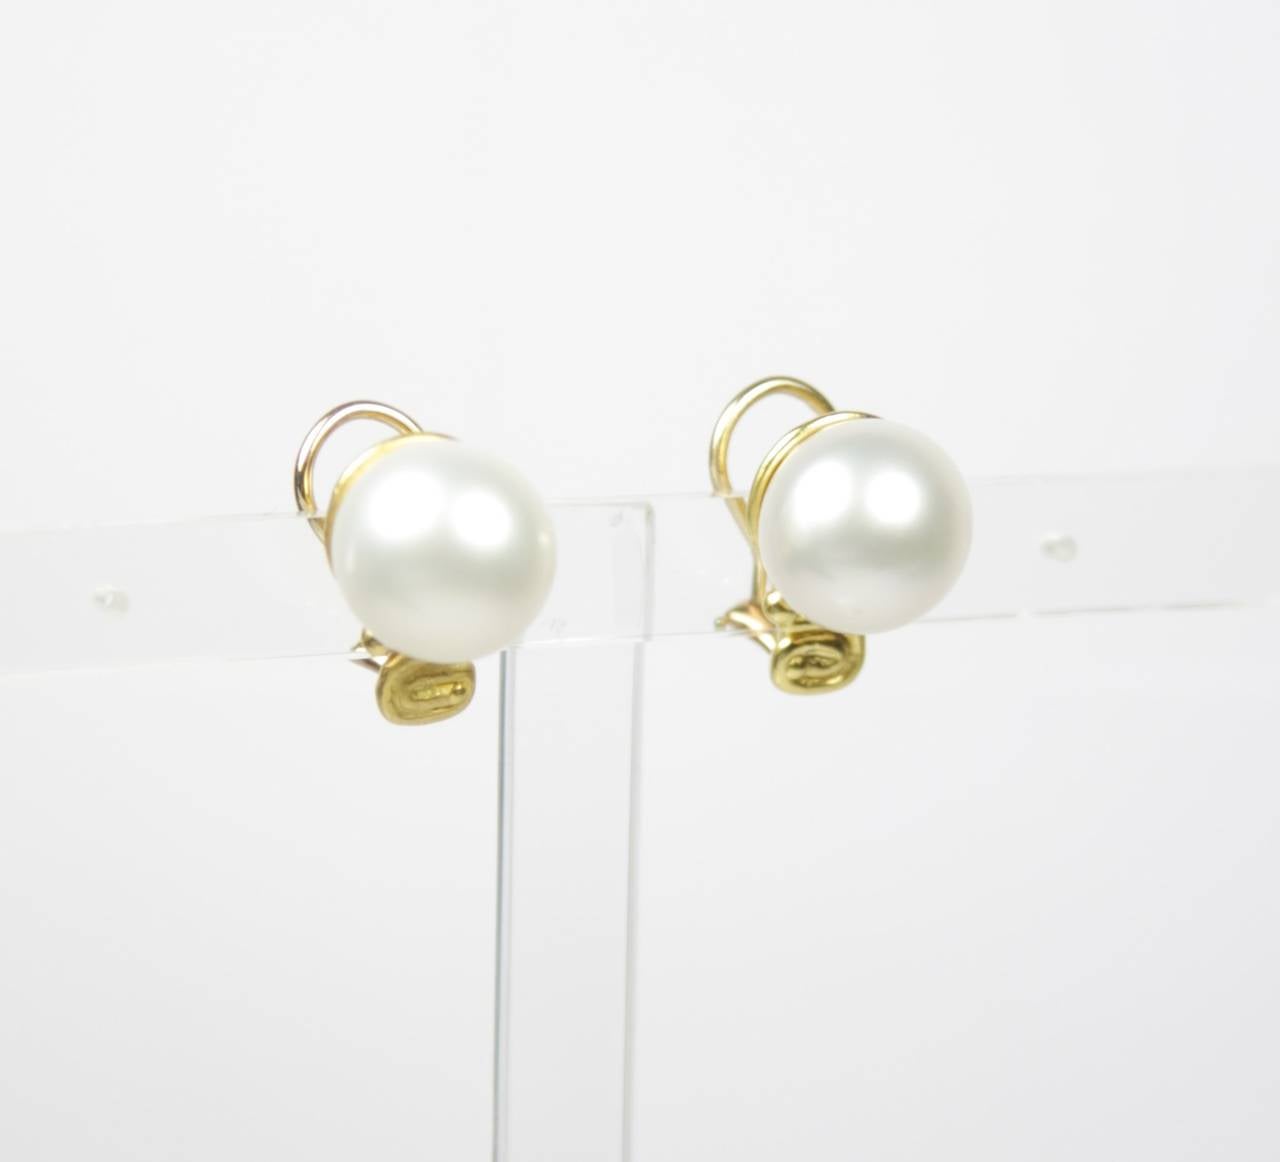 These earrings are available through The Paper Bag Princess of Beverly Hills. Please feel free to contact us with any inquiries you may have. 

These 22TK Yellow gold and pearl earrings features a clip-on closure. The pearl offers a perfect